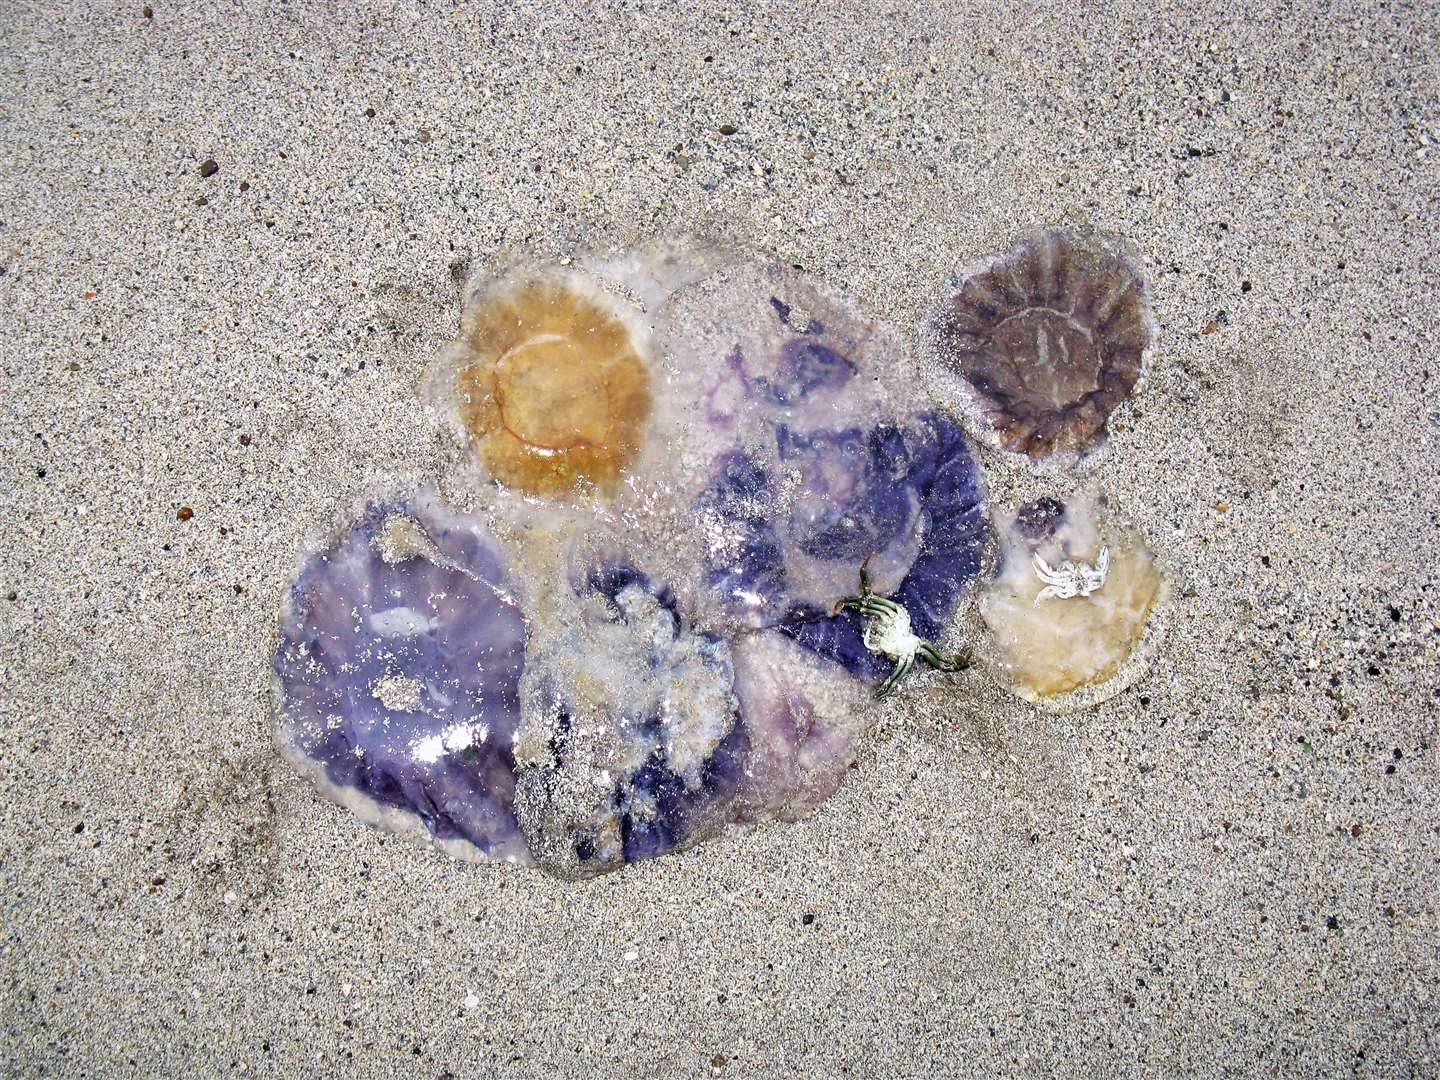 Several different species of the sea creatures on Reiss beach.